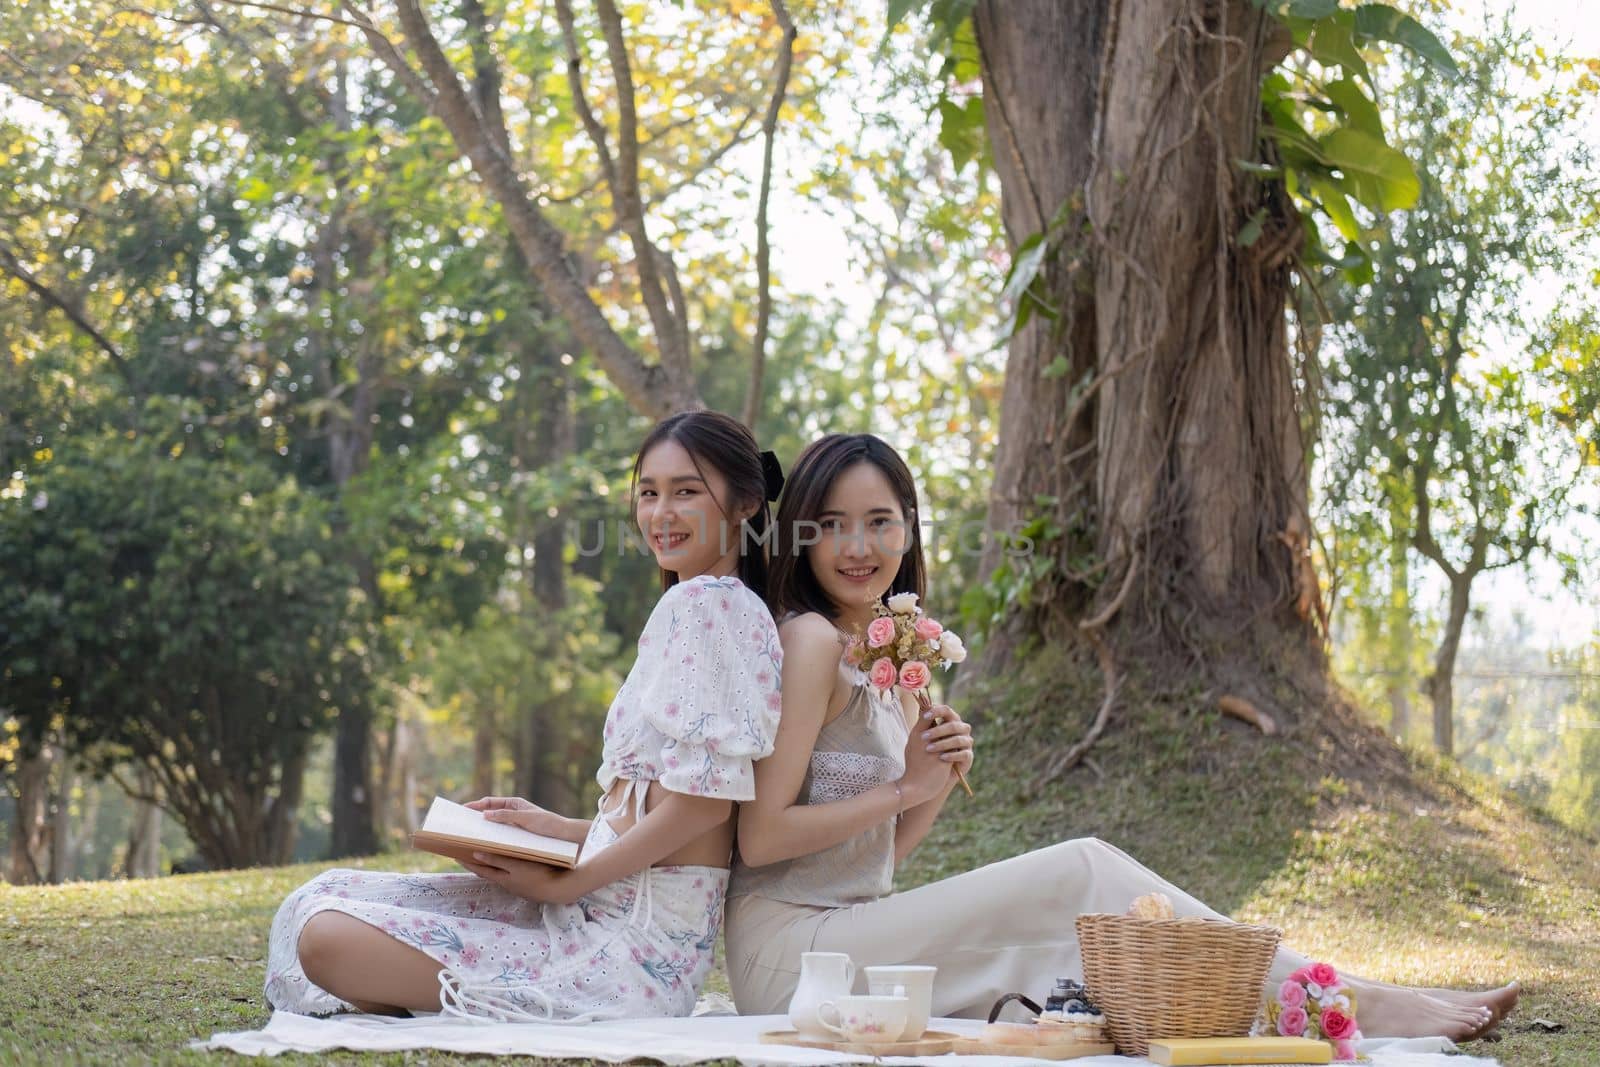 Charming beautiful young Asian woman in a lovely dress, holding a flower bouquet, enjoying a picnic with her friend in the park.